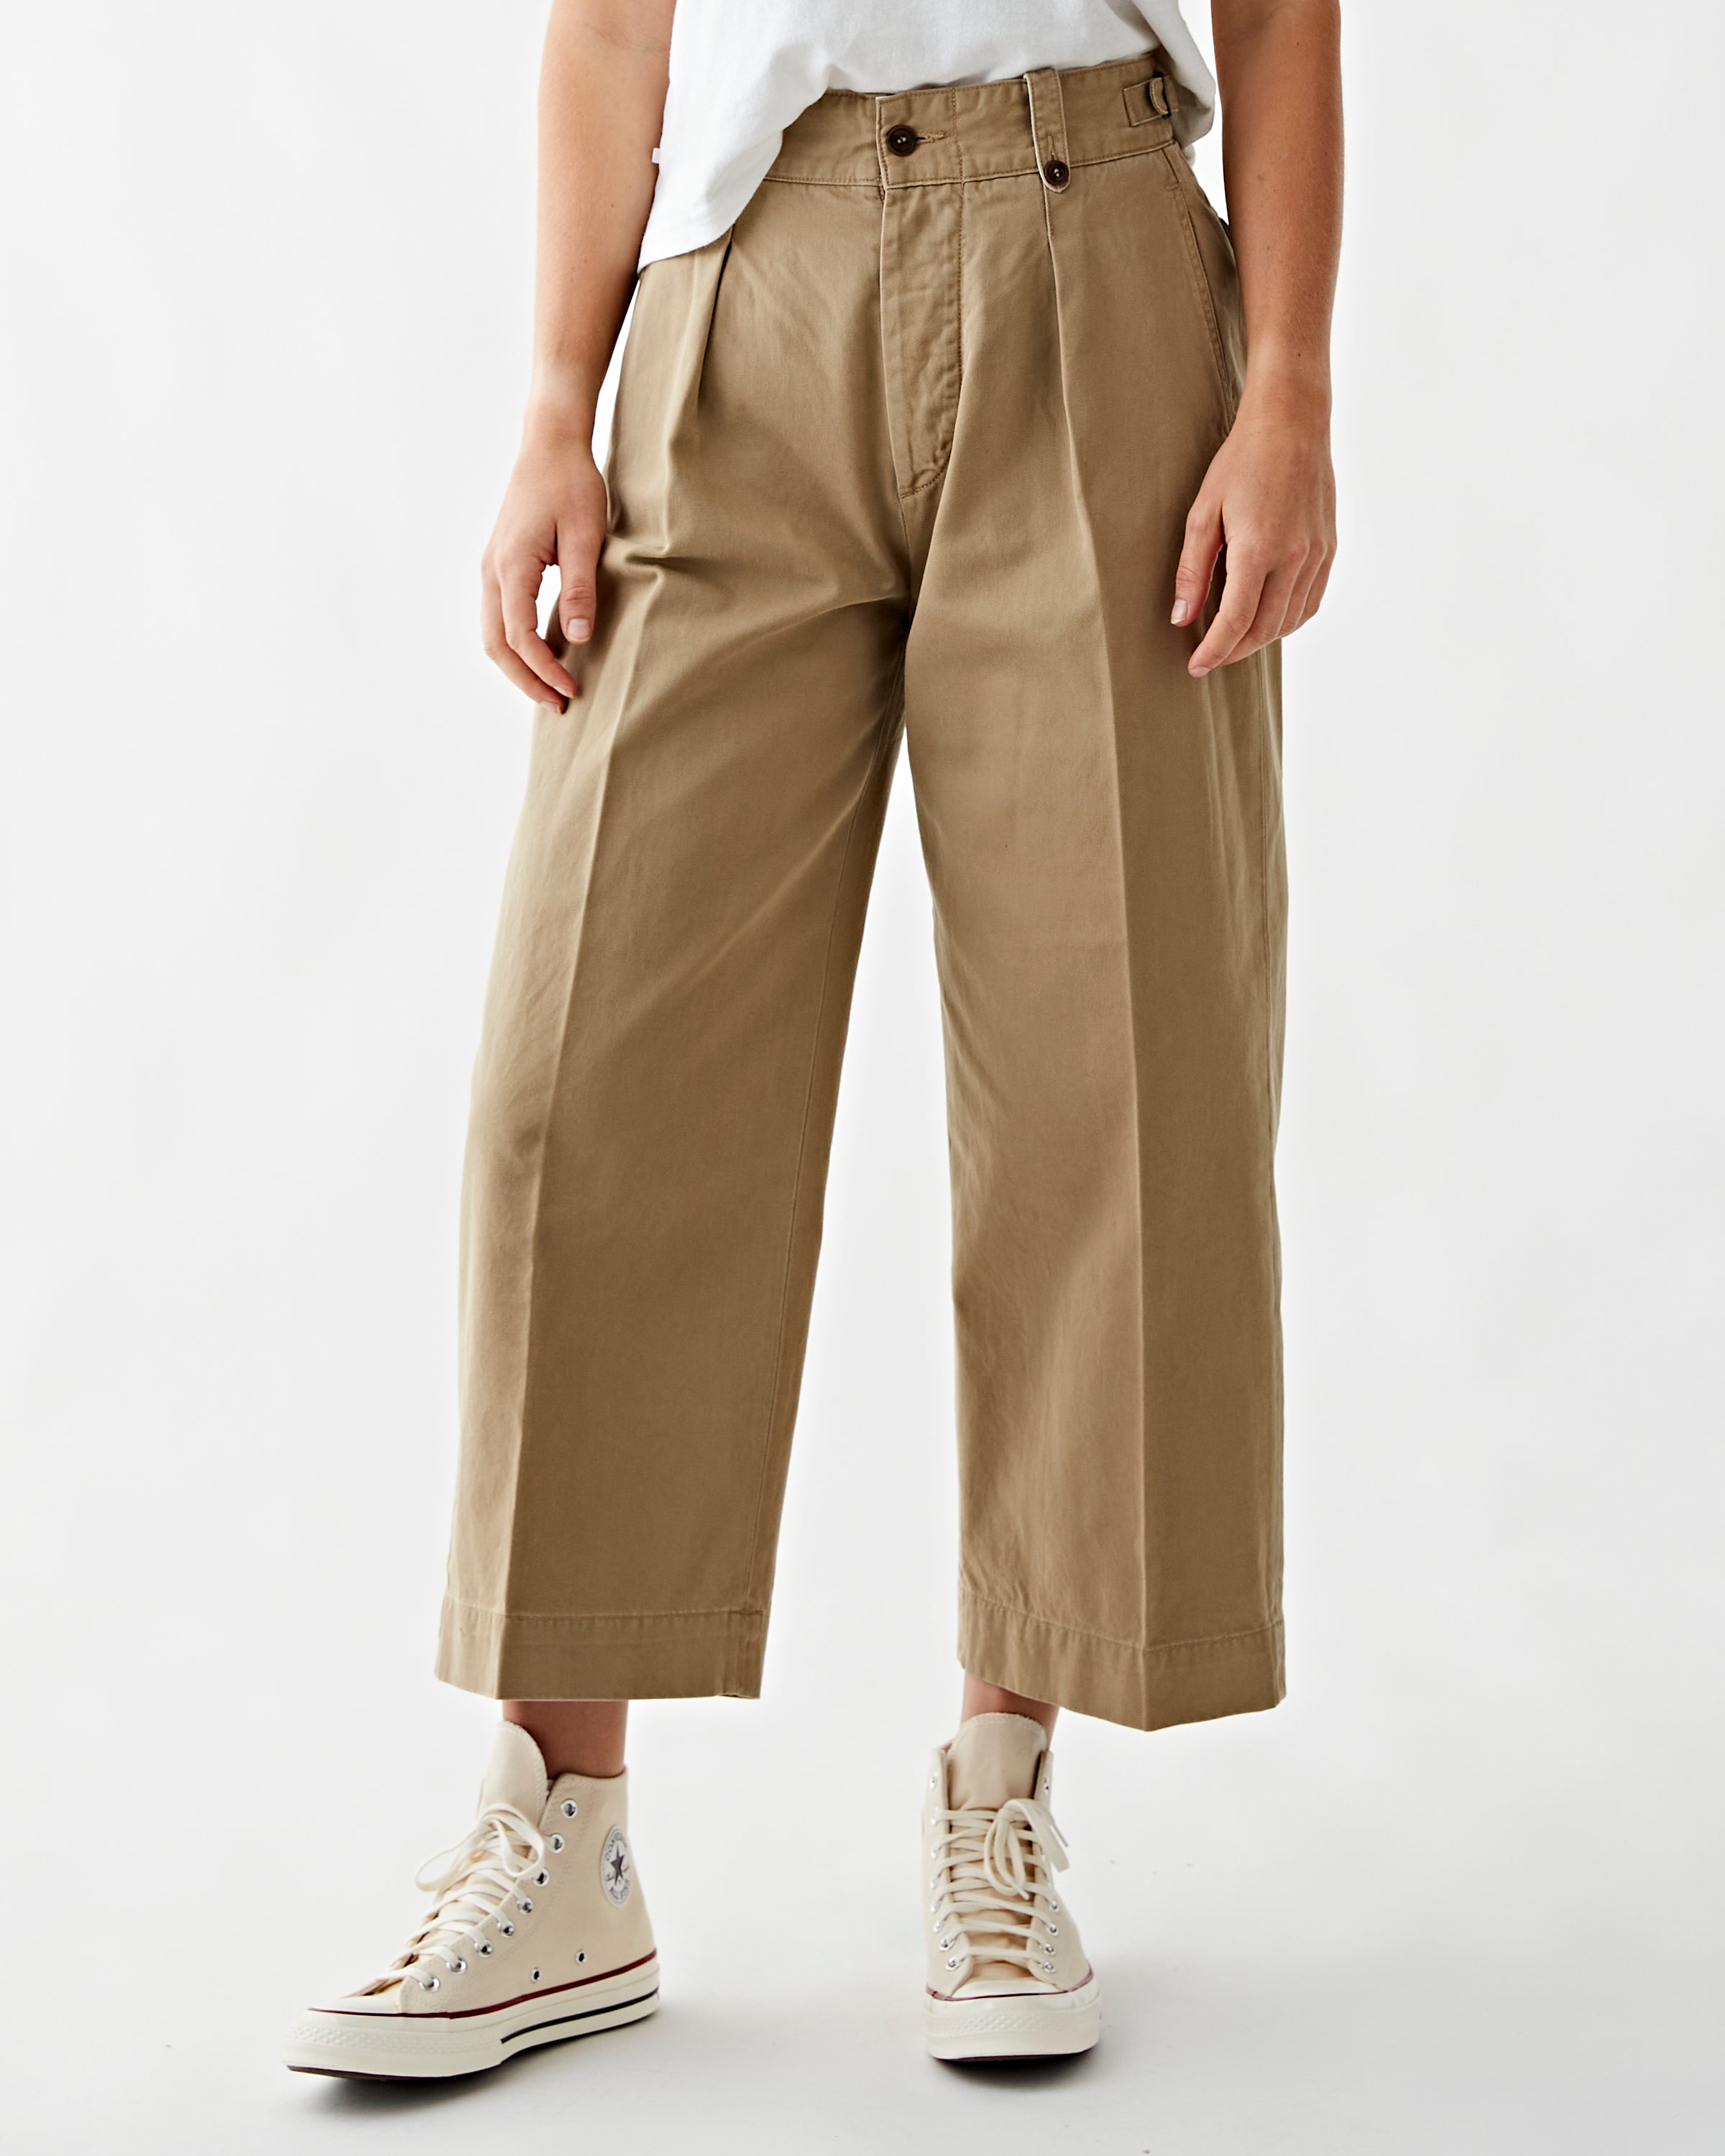 Nike Gas Trousers - Buy Nike Gas Trousers online in India